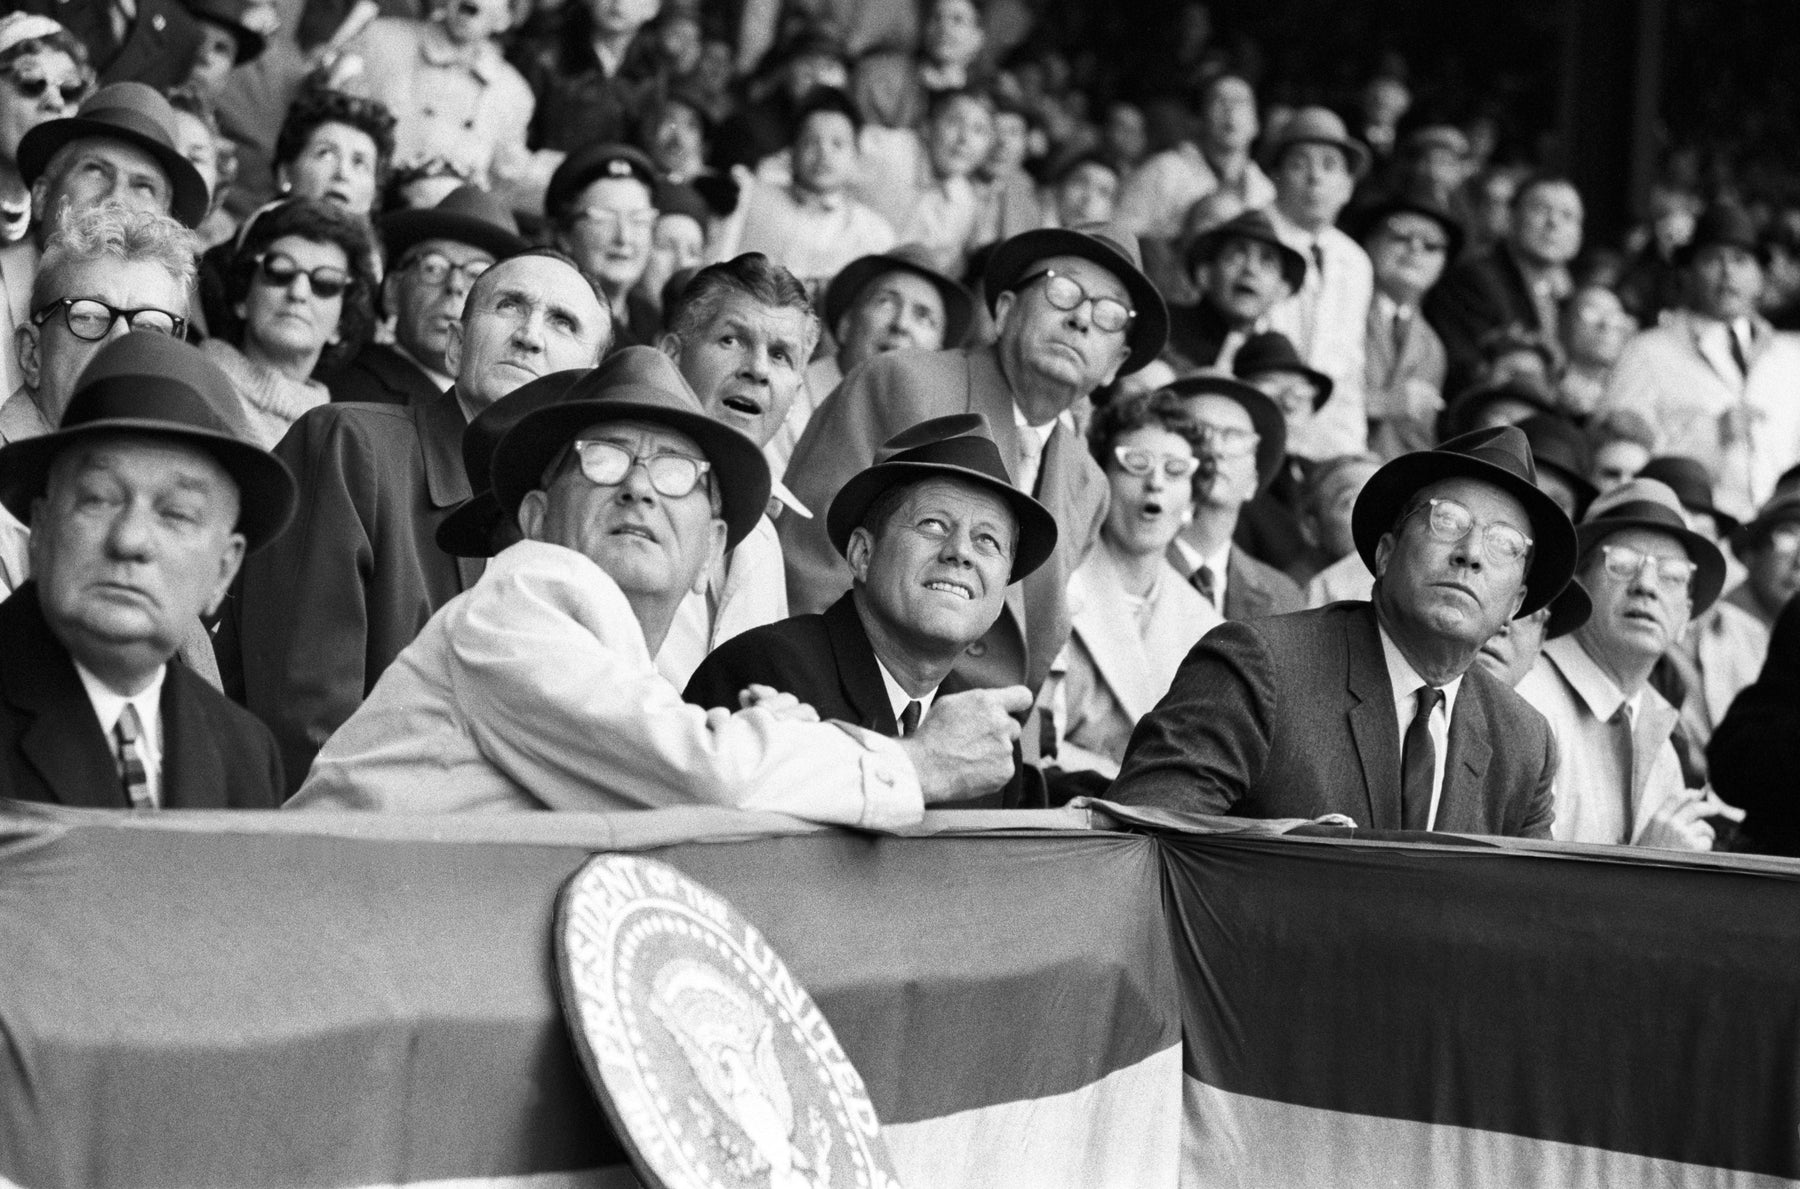 JFK and LBJ at Opening Day